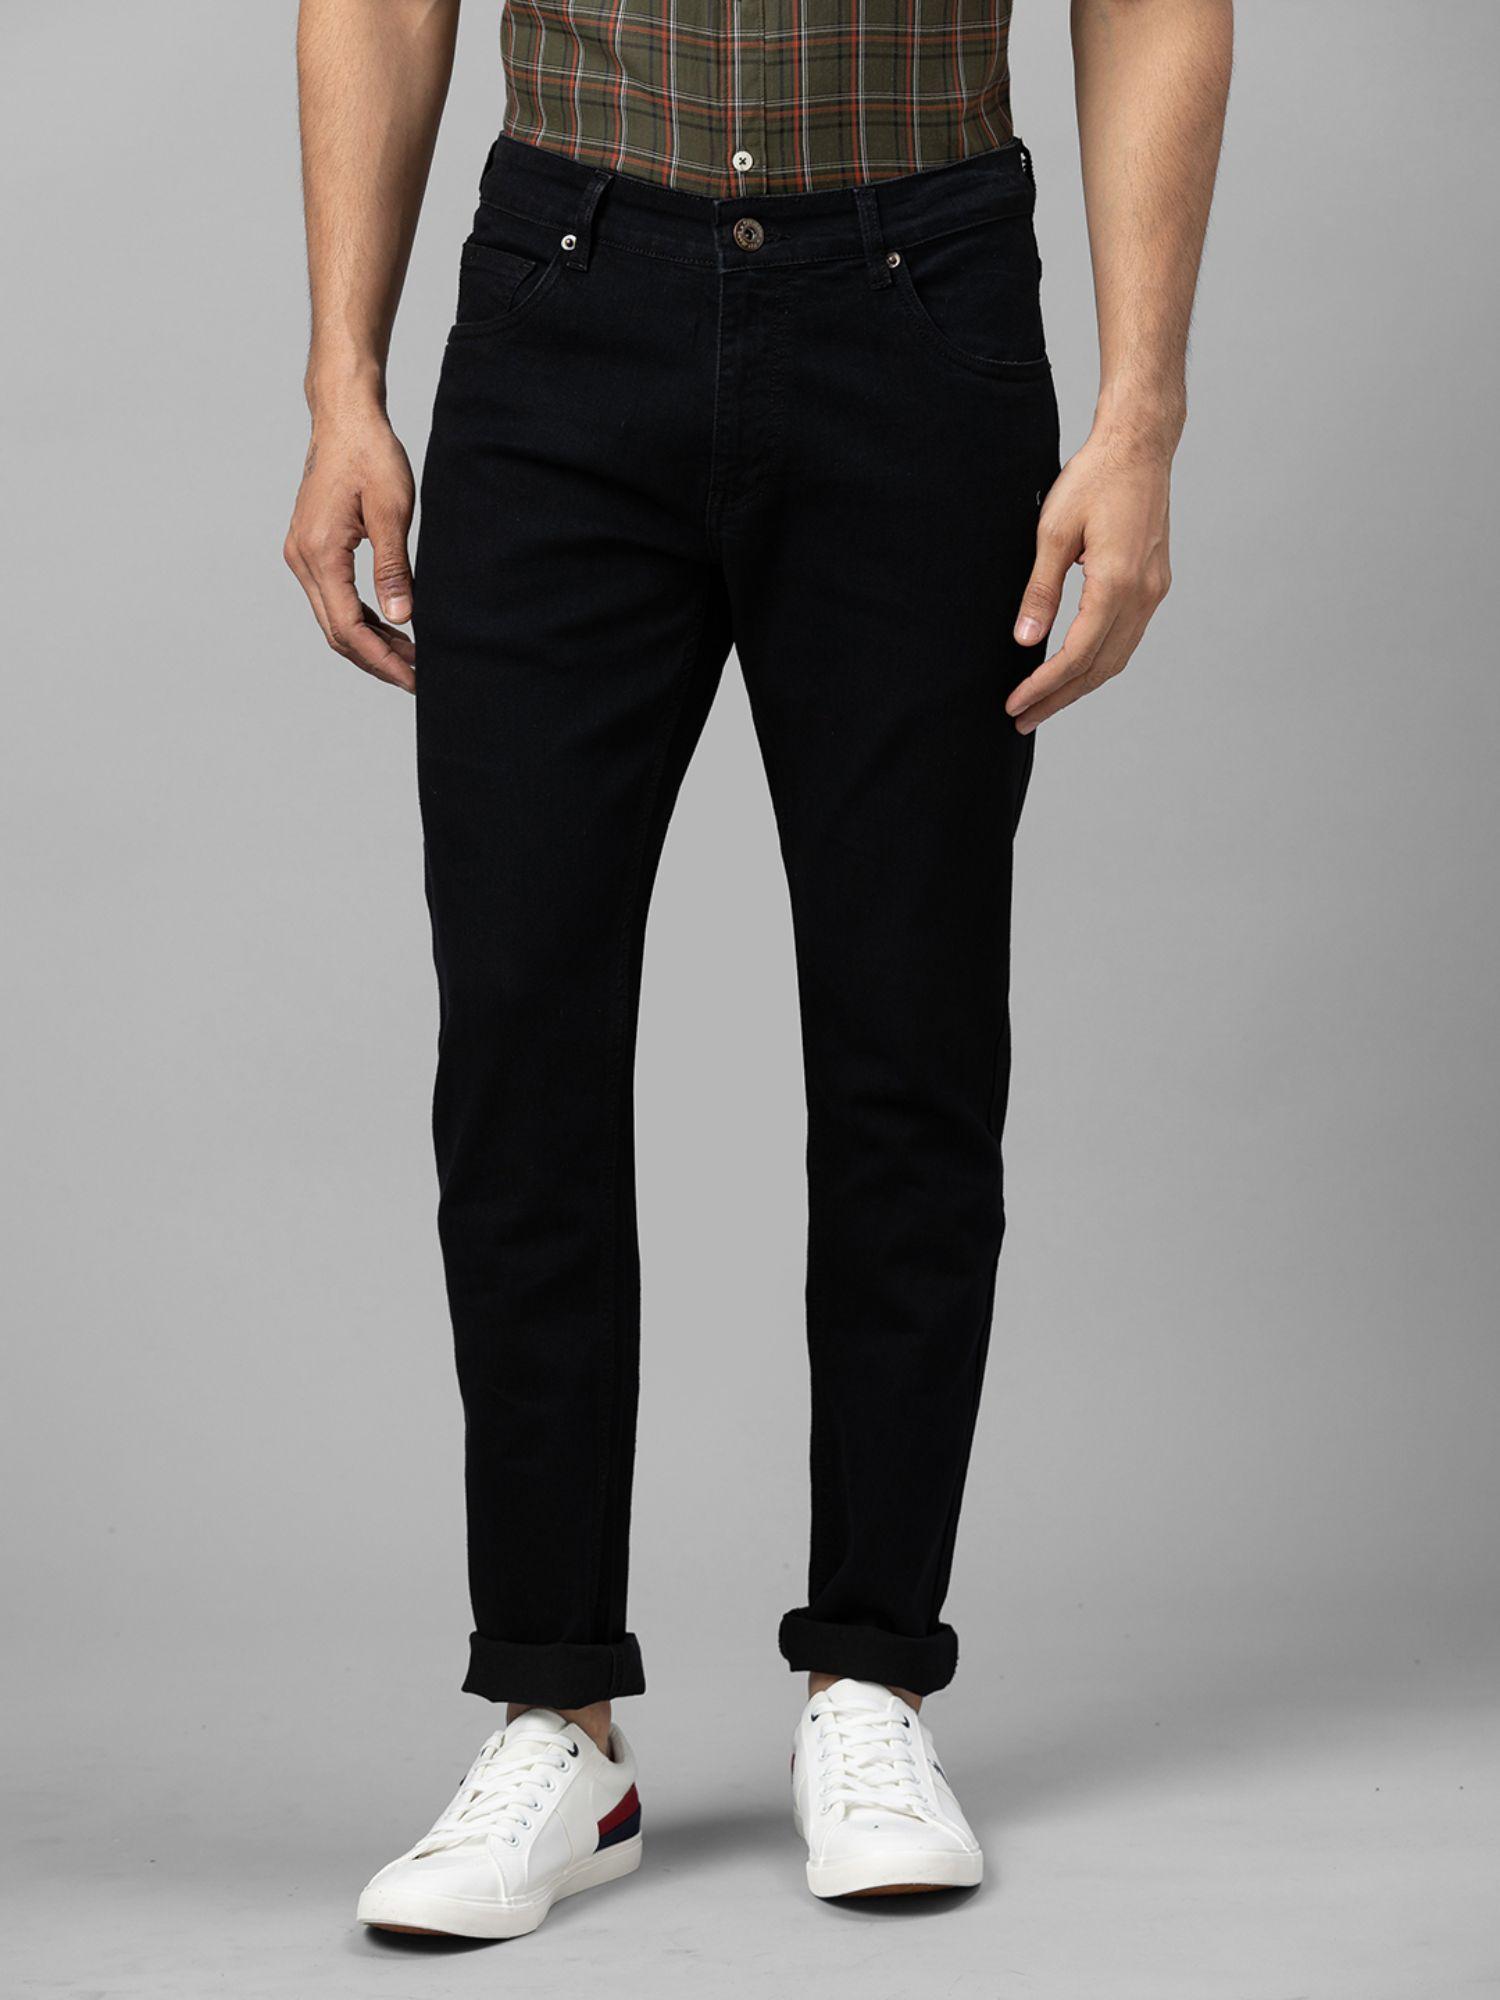 black tapered fit jeans